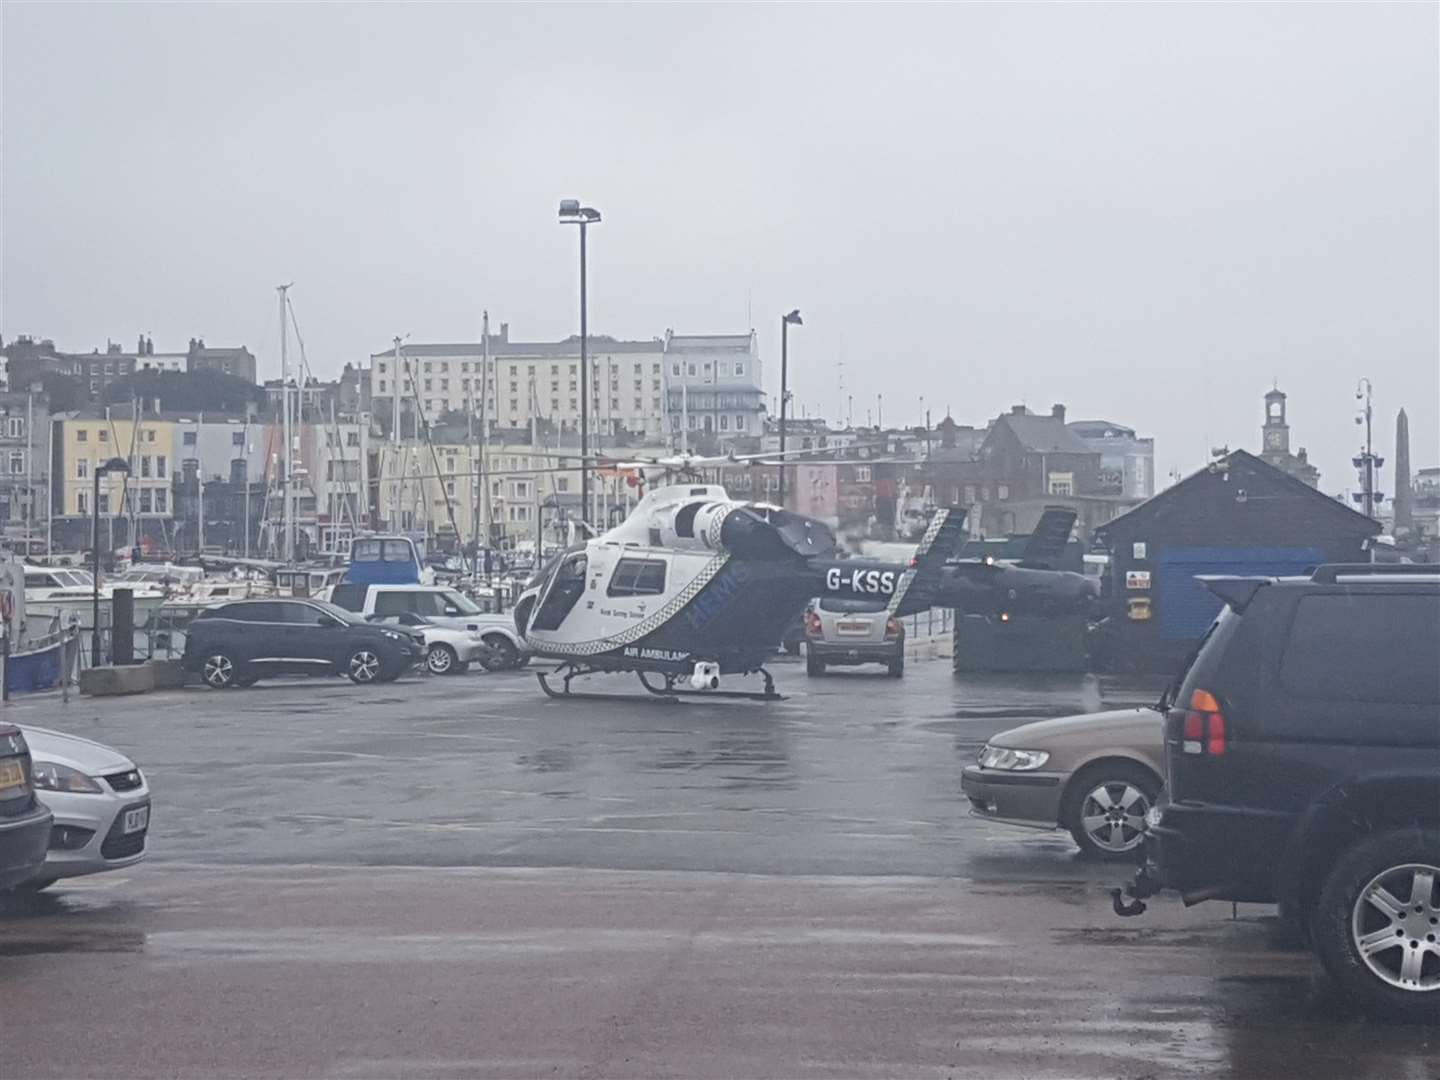 The air ambulance lands at Ramsgate Harbour